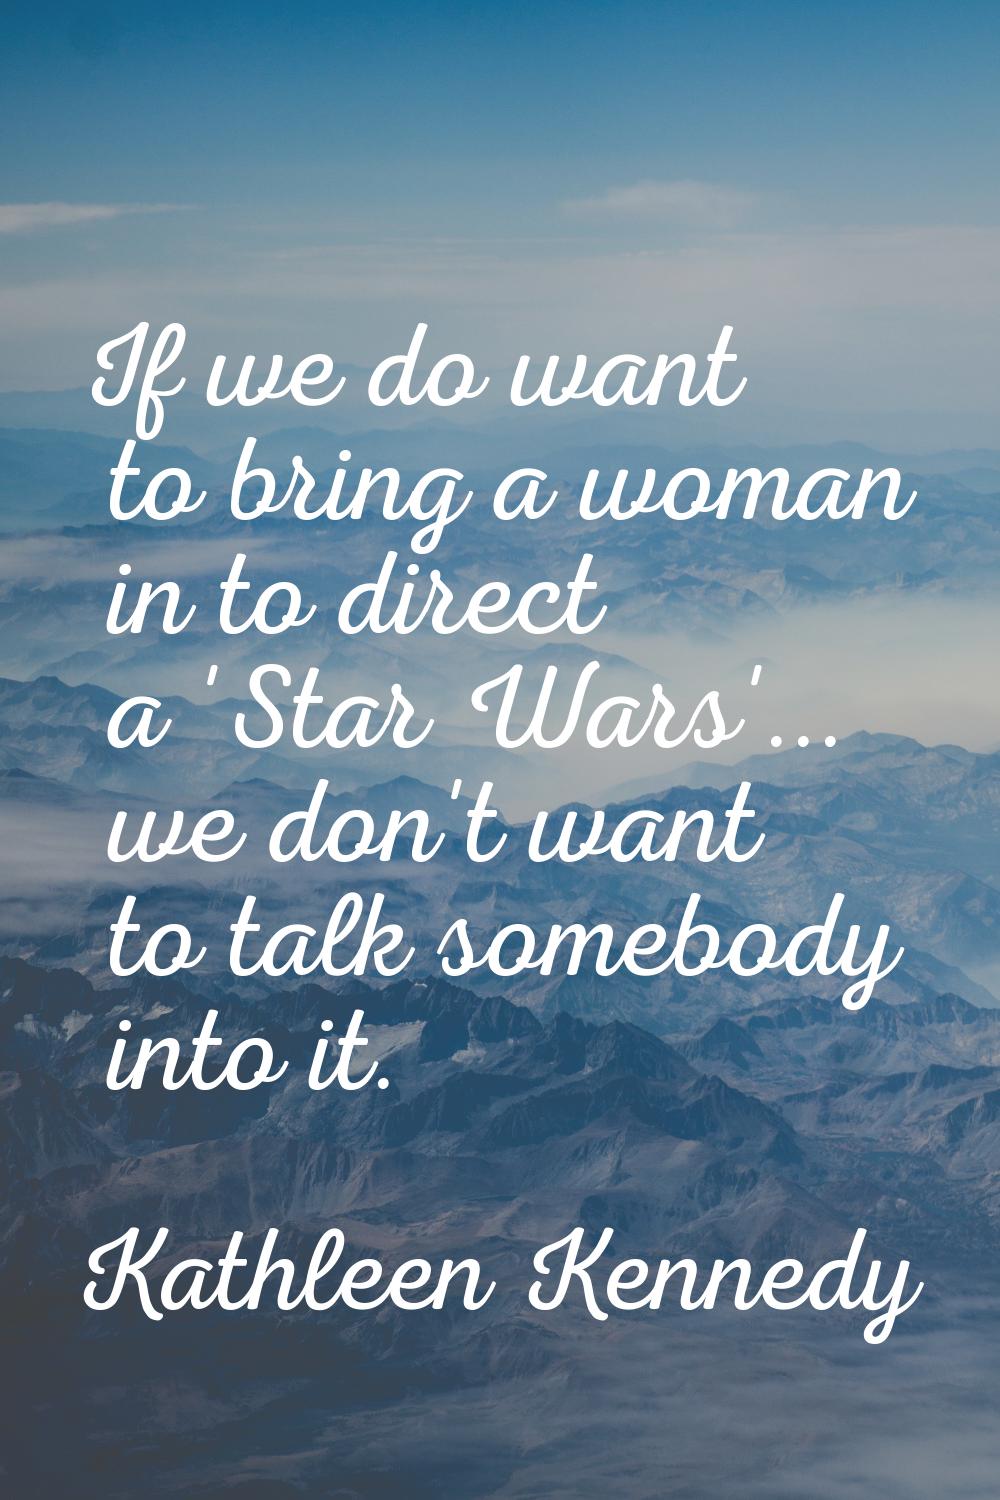 If we do want to bring a woman in to direct a 'Star Wars'... we don't want to talk somebody into it